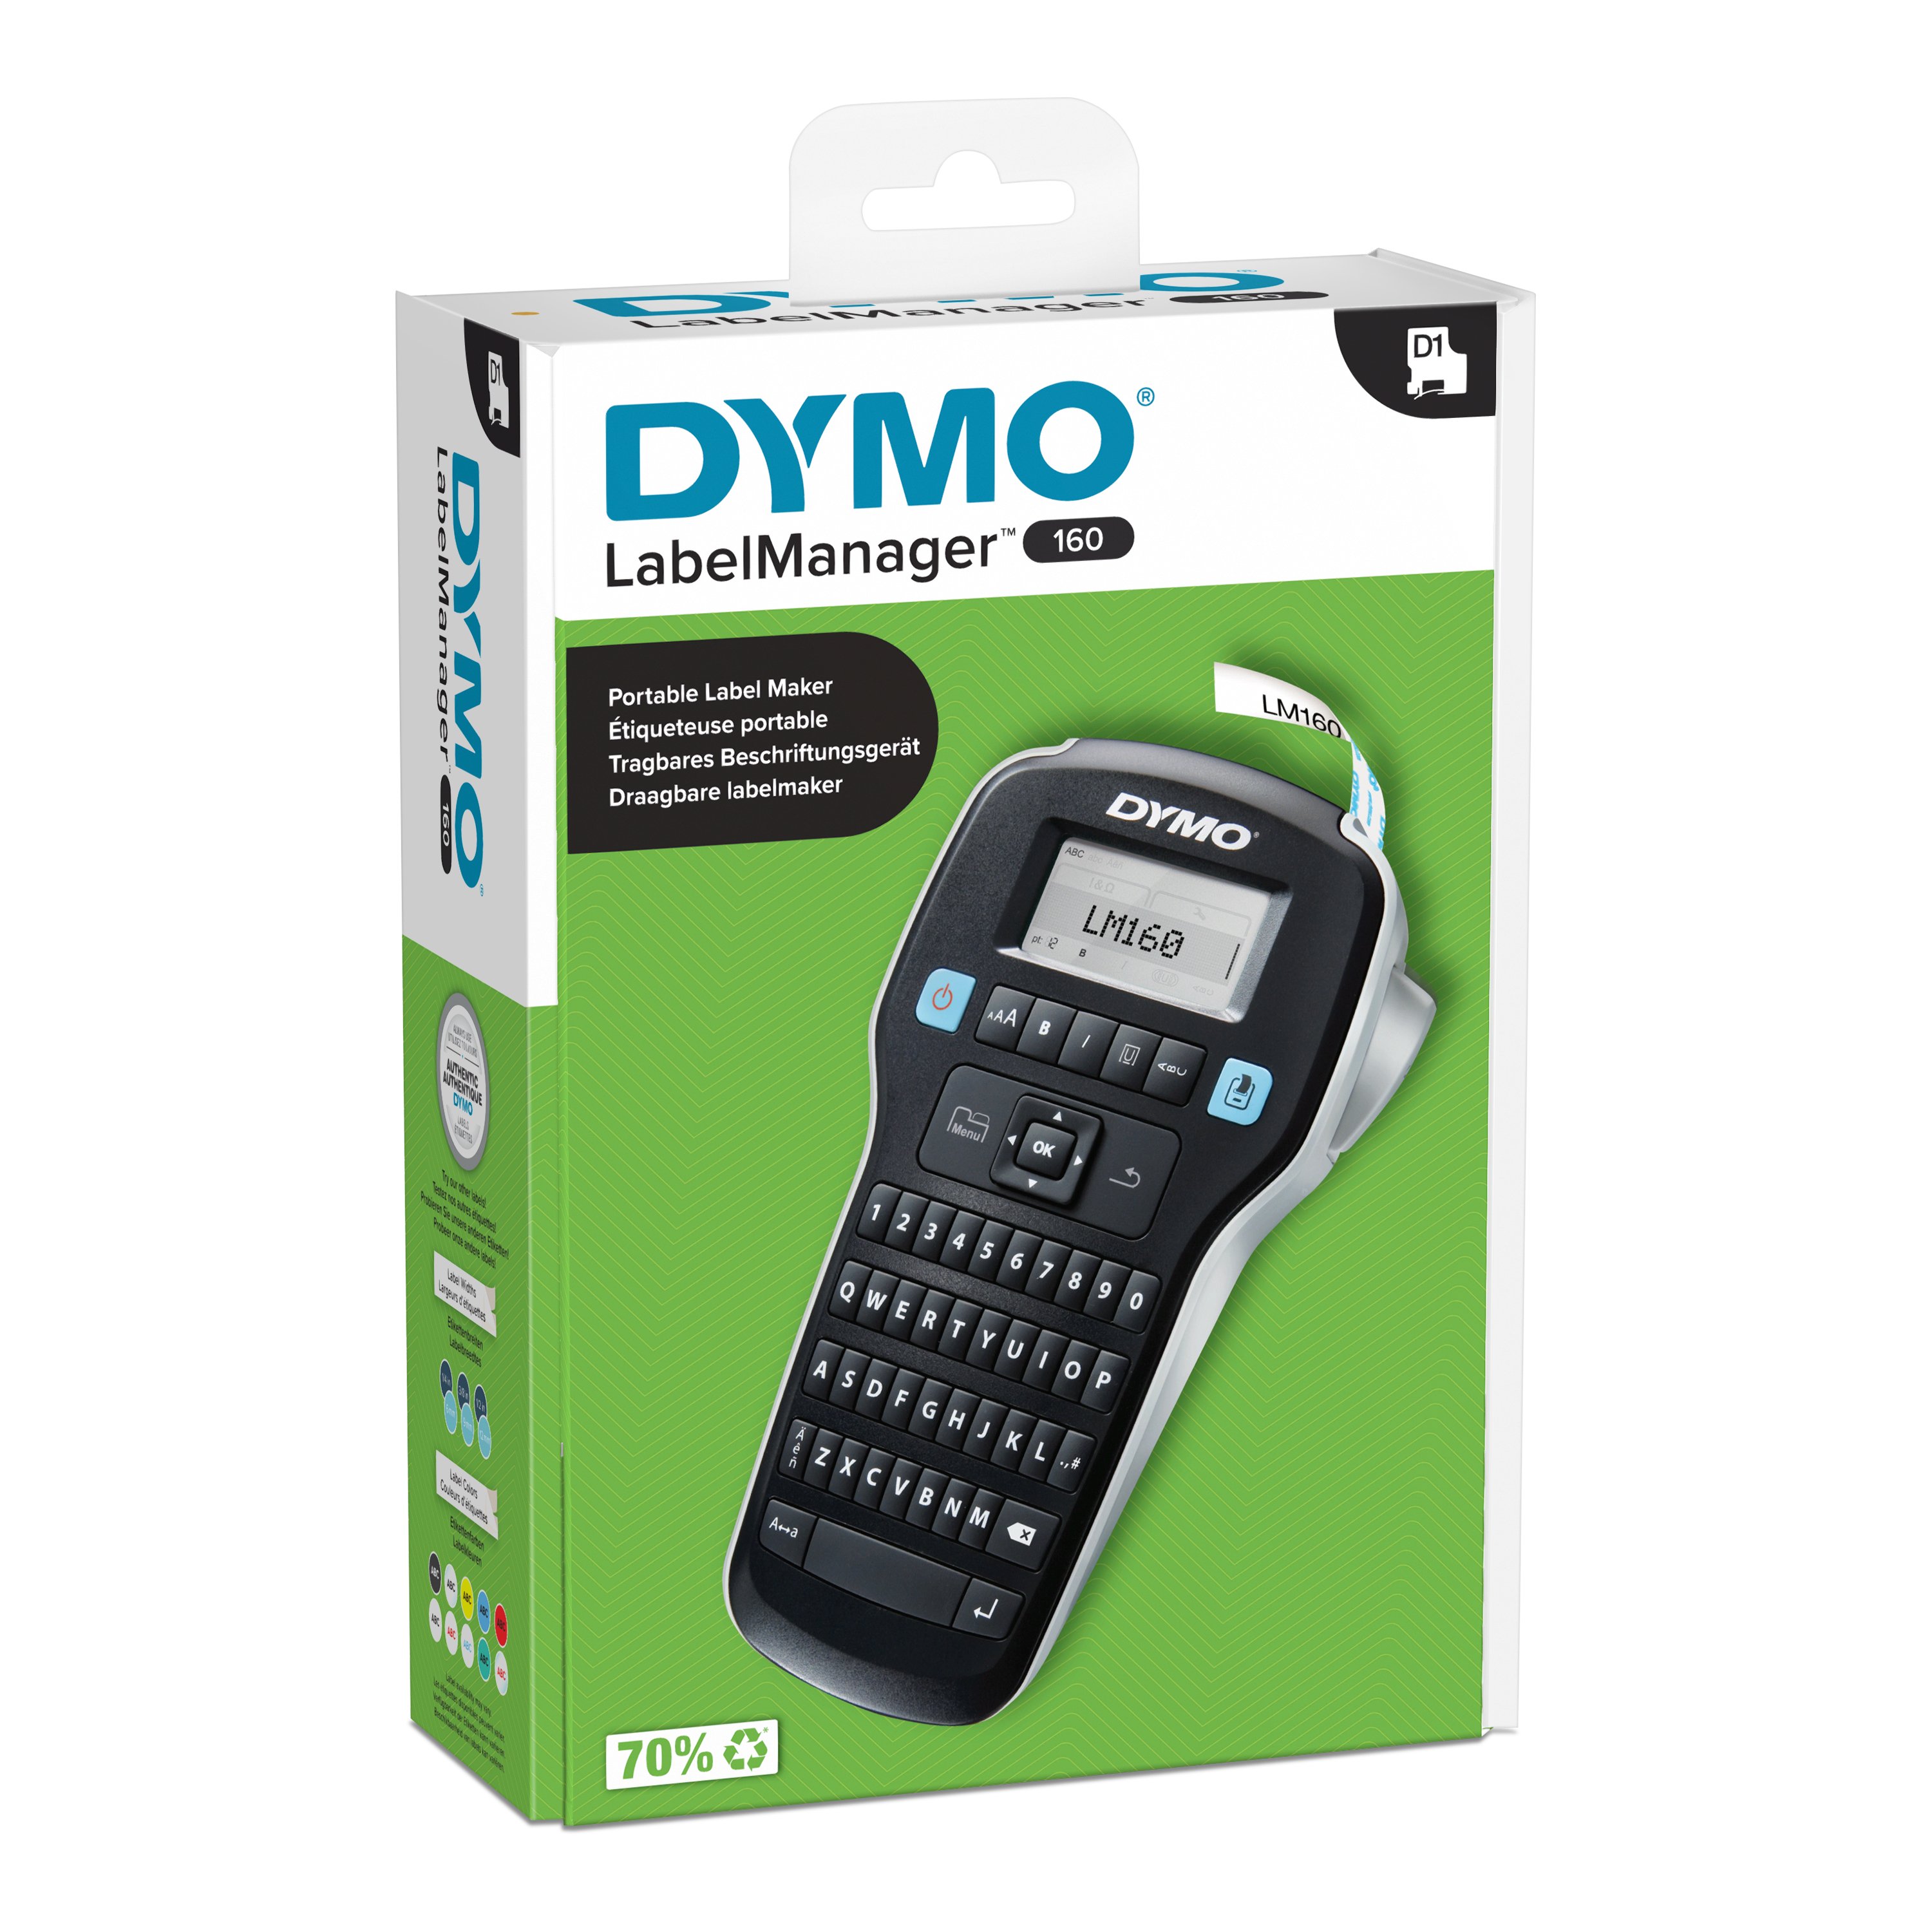 DYMO - LabelManager™ 160 Label maker Qwerty (2174612)